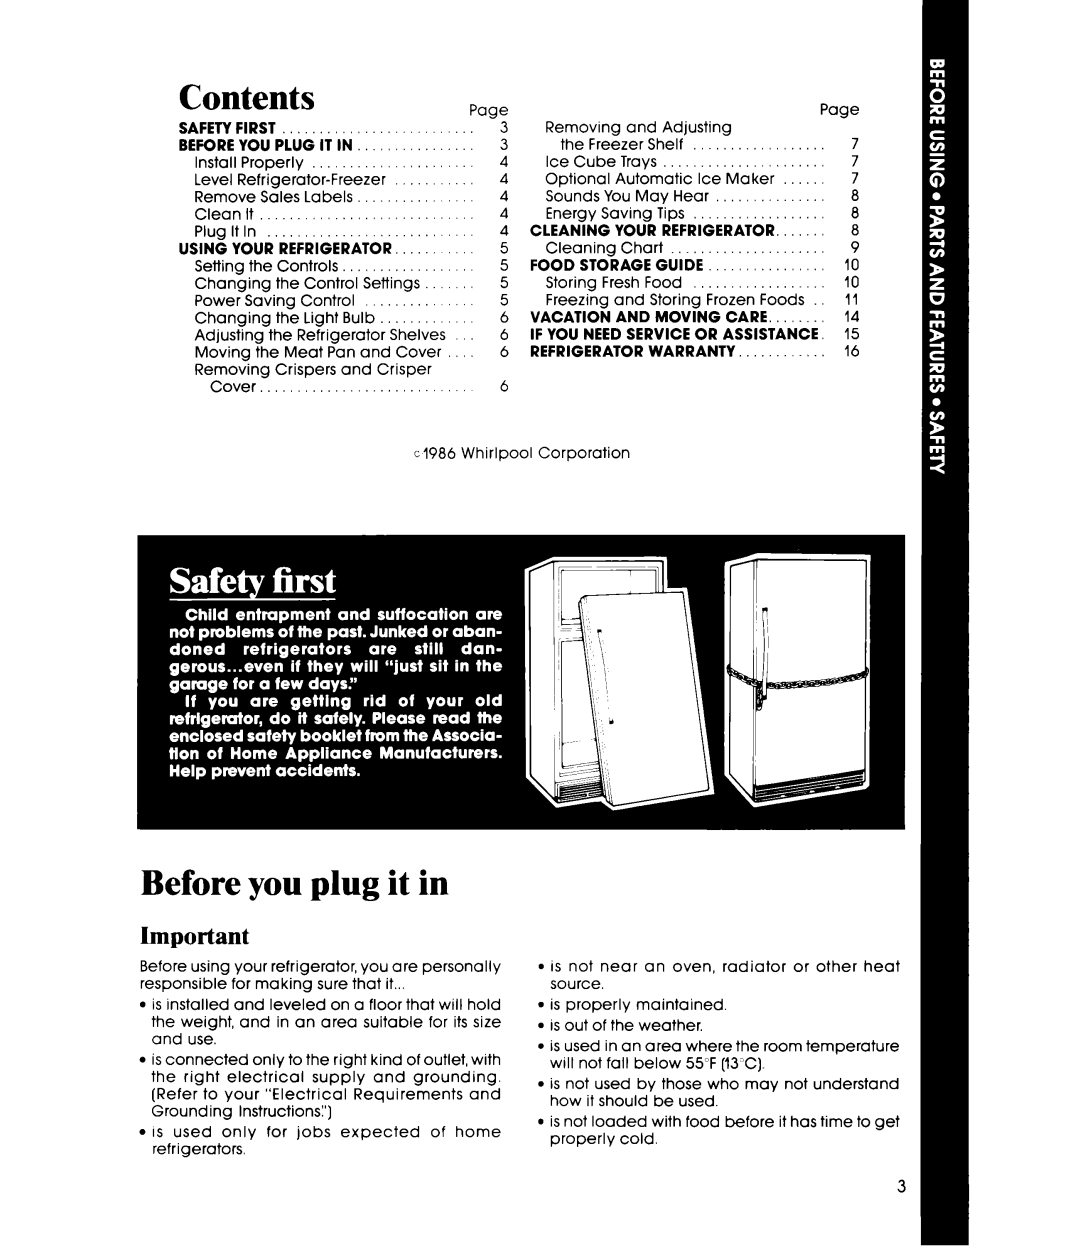 Whirlpool ET18XK, ET18VK manual Before you plug it in, Contents 